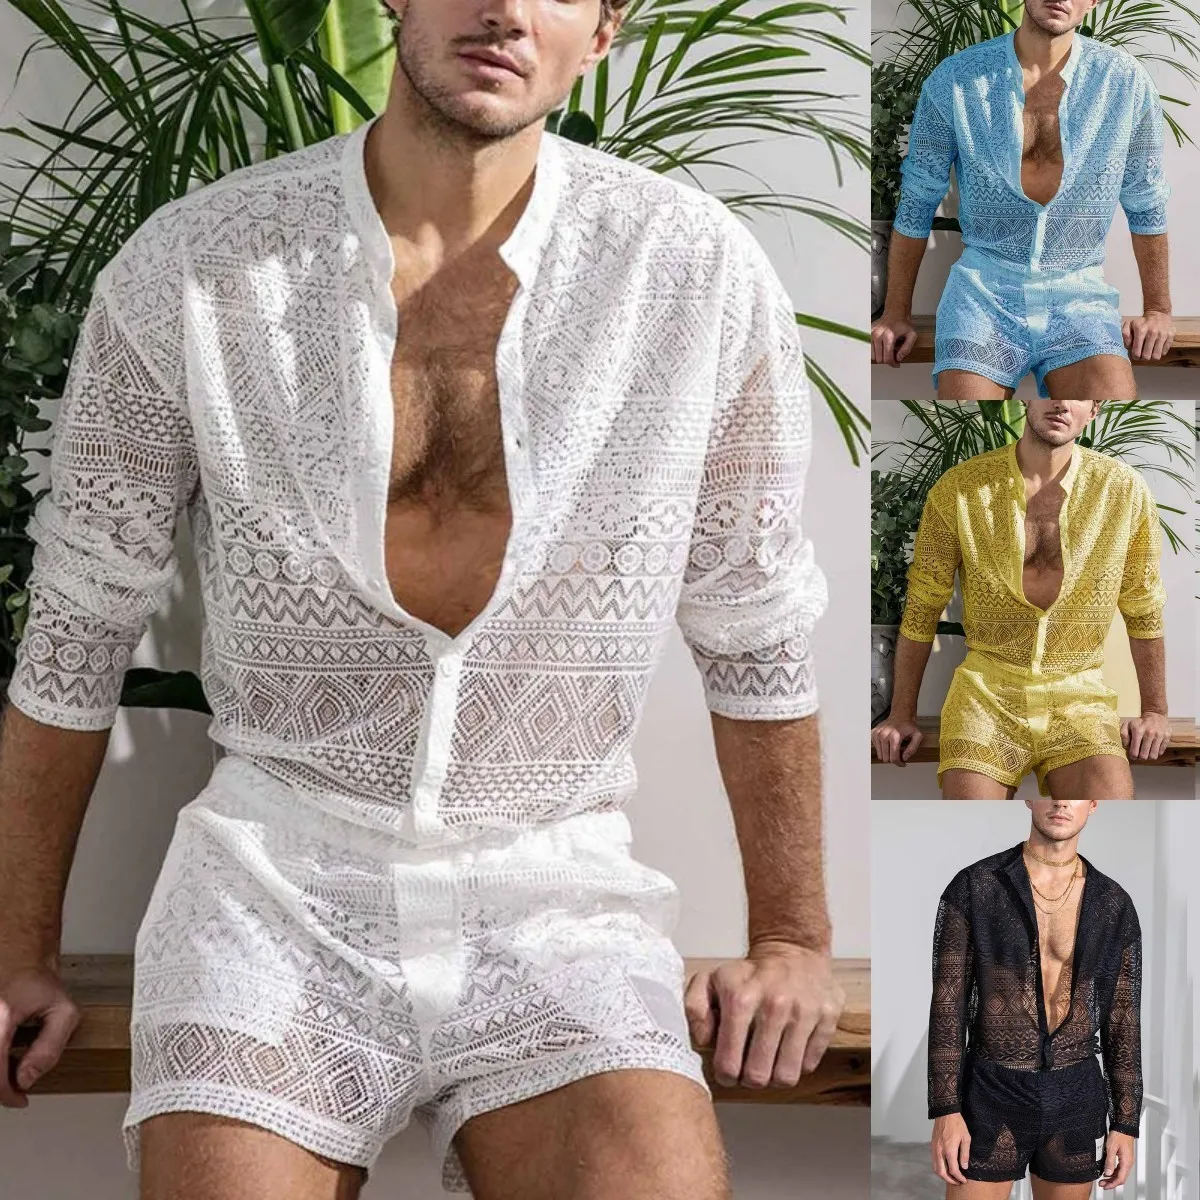 Men's Tracksuits Men Set Summer Sexy See Through Lace Outfits Beach Fashion Short Sleeved Tops Shorts Sissy Crossdressing Porno Gay Suits 230717